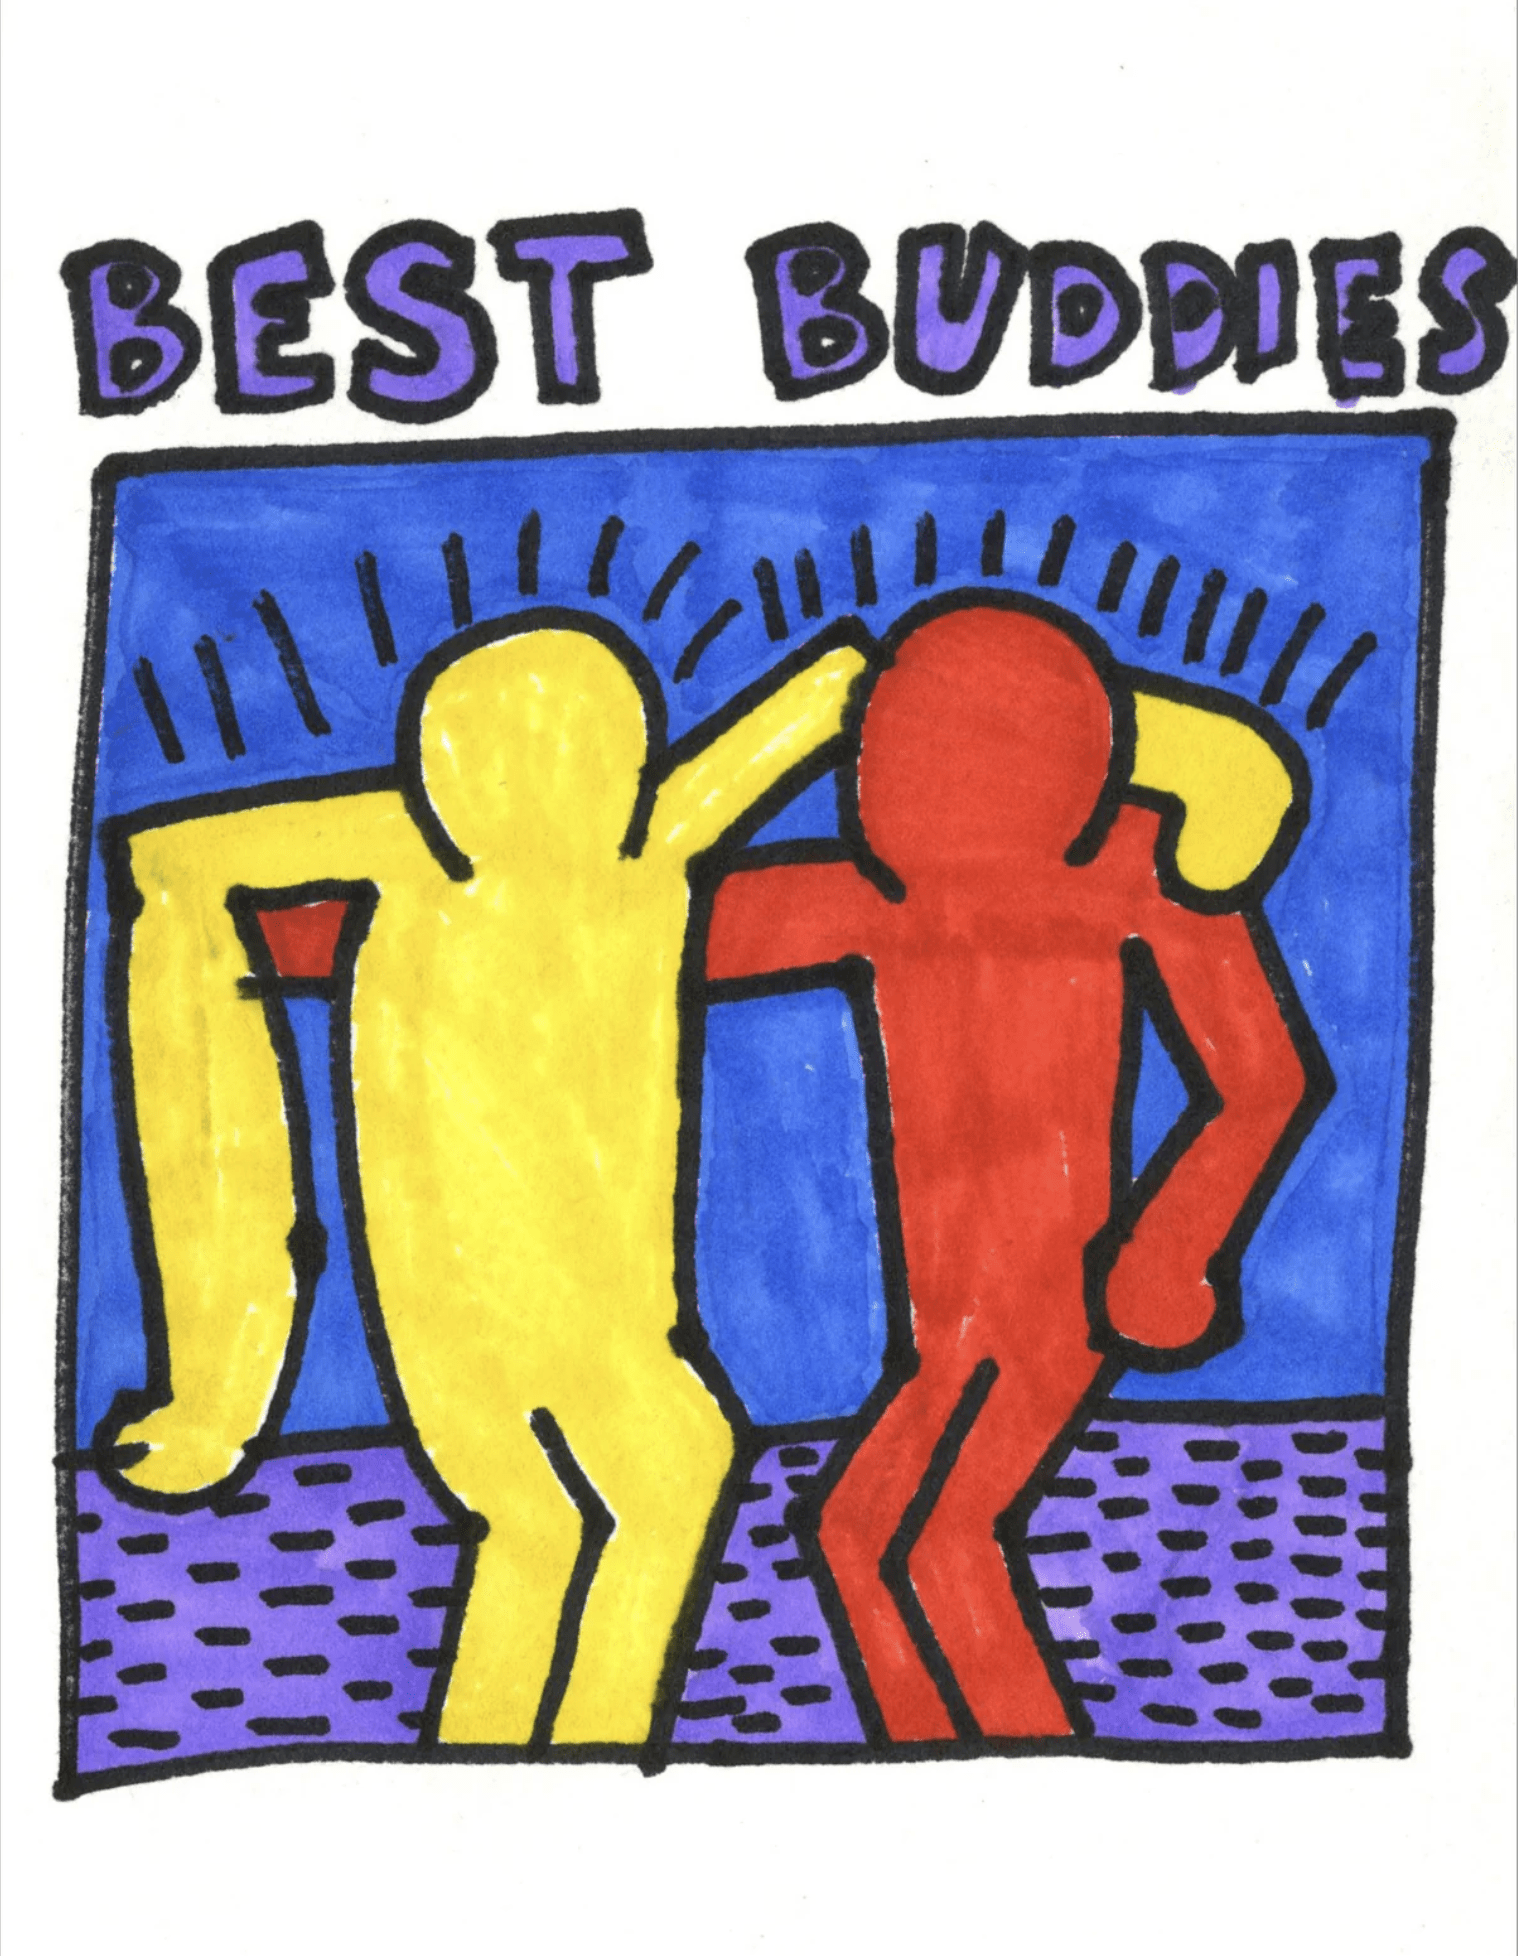 keith haring style marker on paper artwork of two people like figures with their arms around each other.